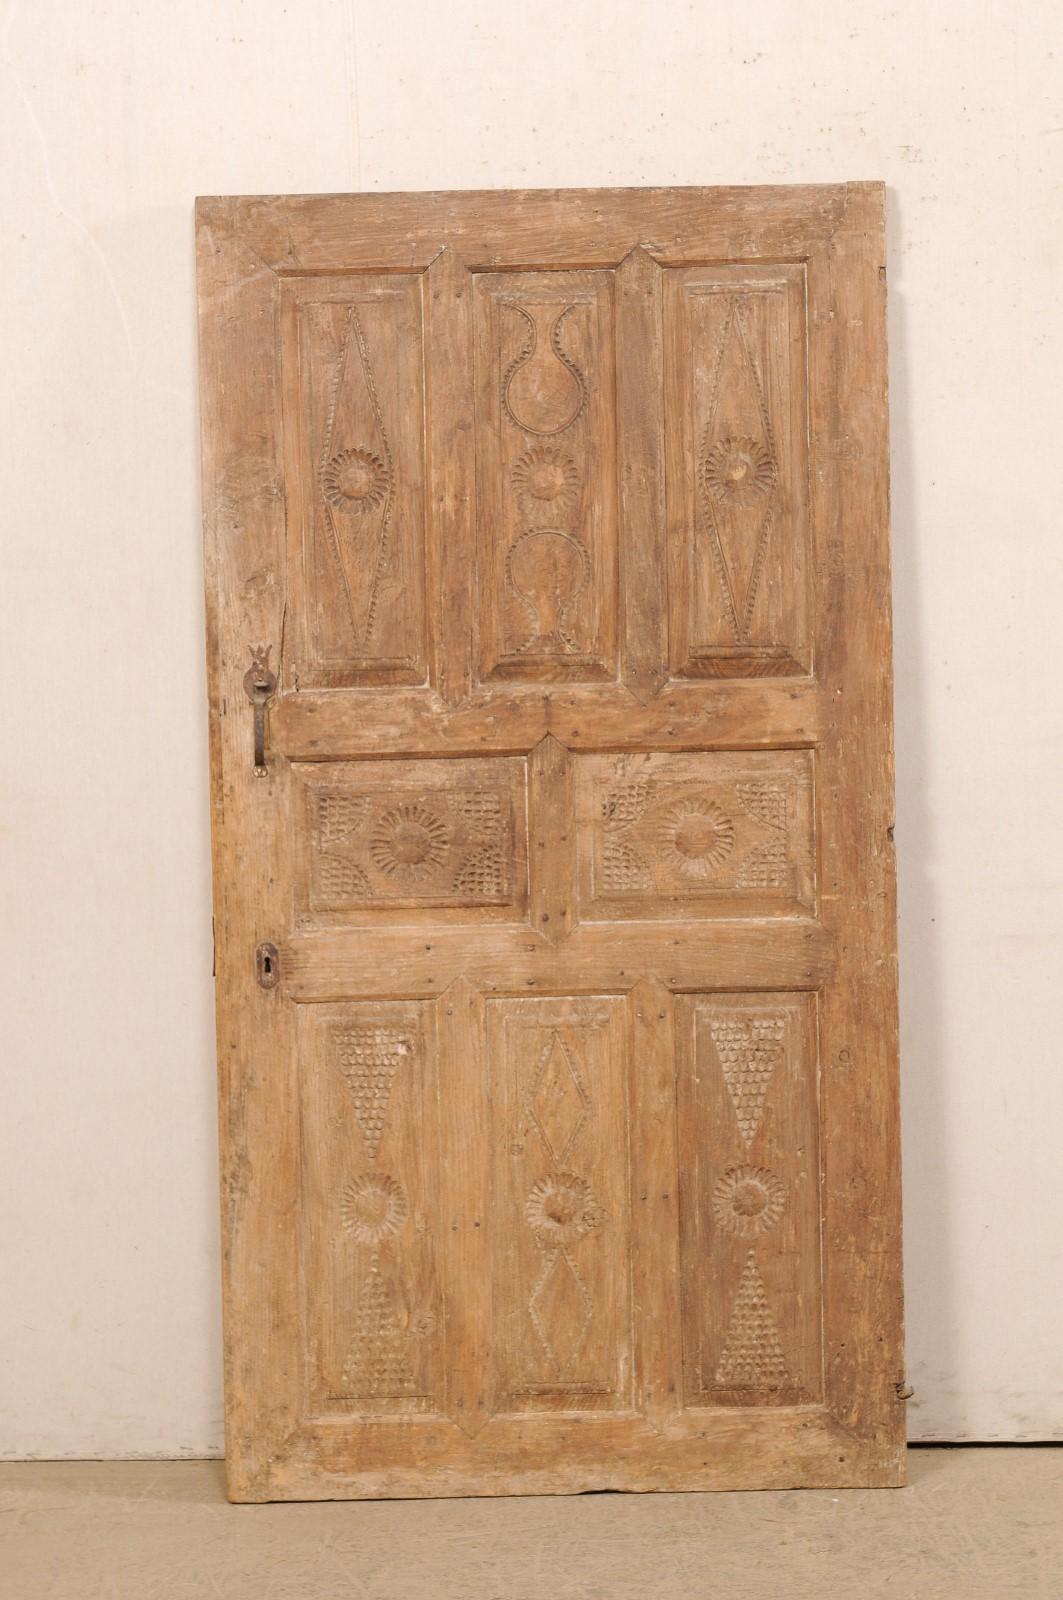 A single Turkish raised panel door from the 19th century. This antique door from Turkey has a nice 8 raised panel design on its front facade, with beautifully-rustic hand-notched geometric designs adorning each of the panels. The door is shorter